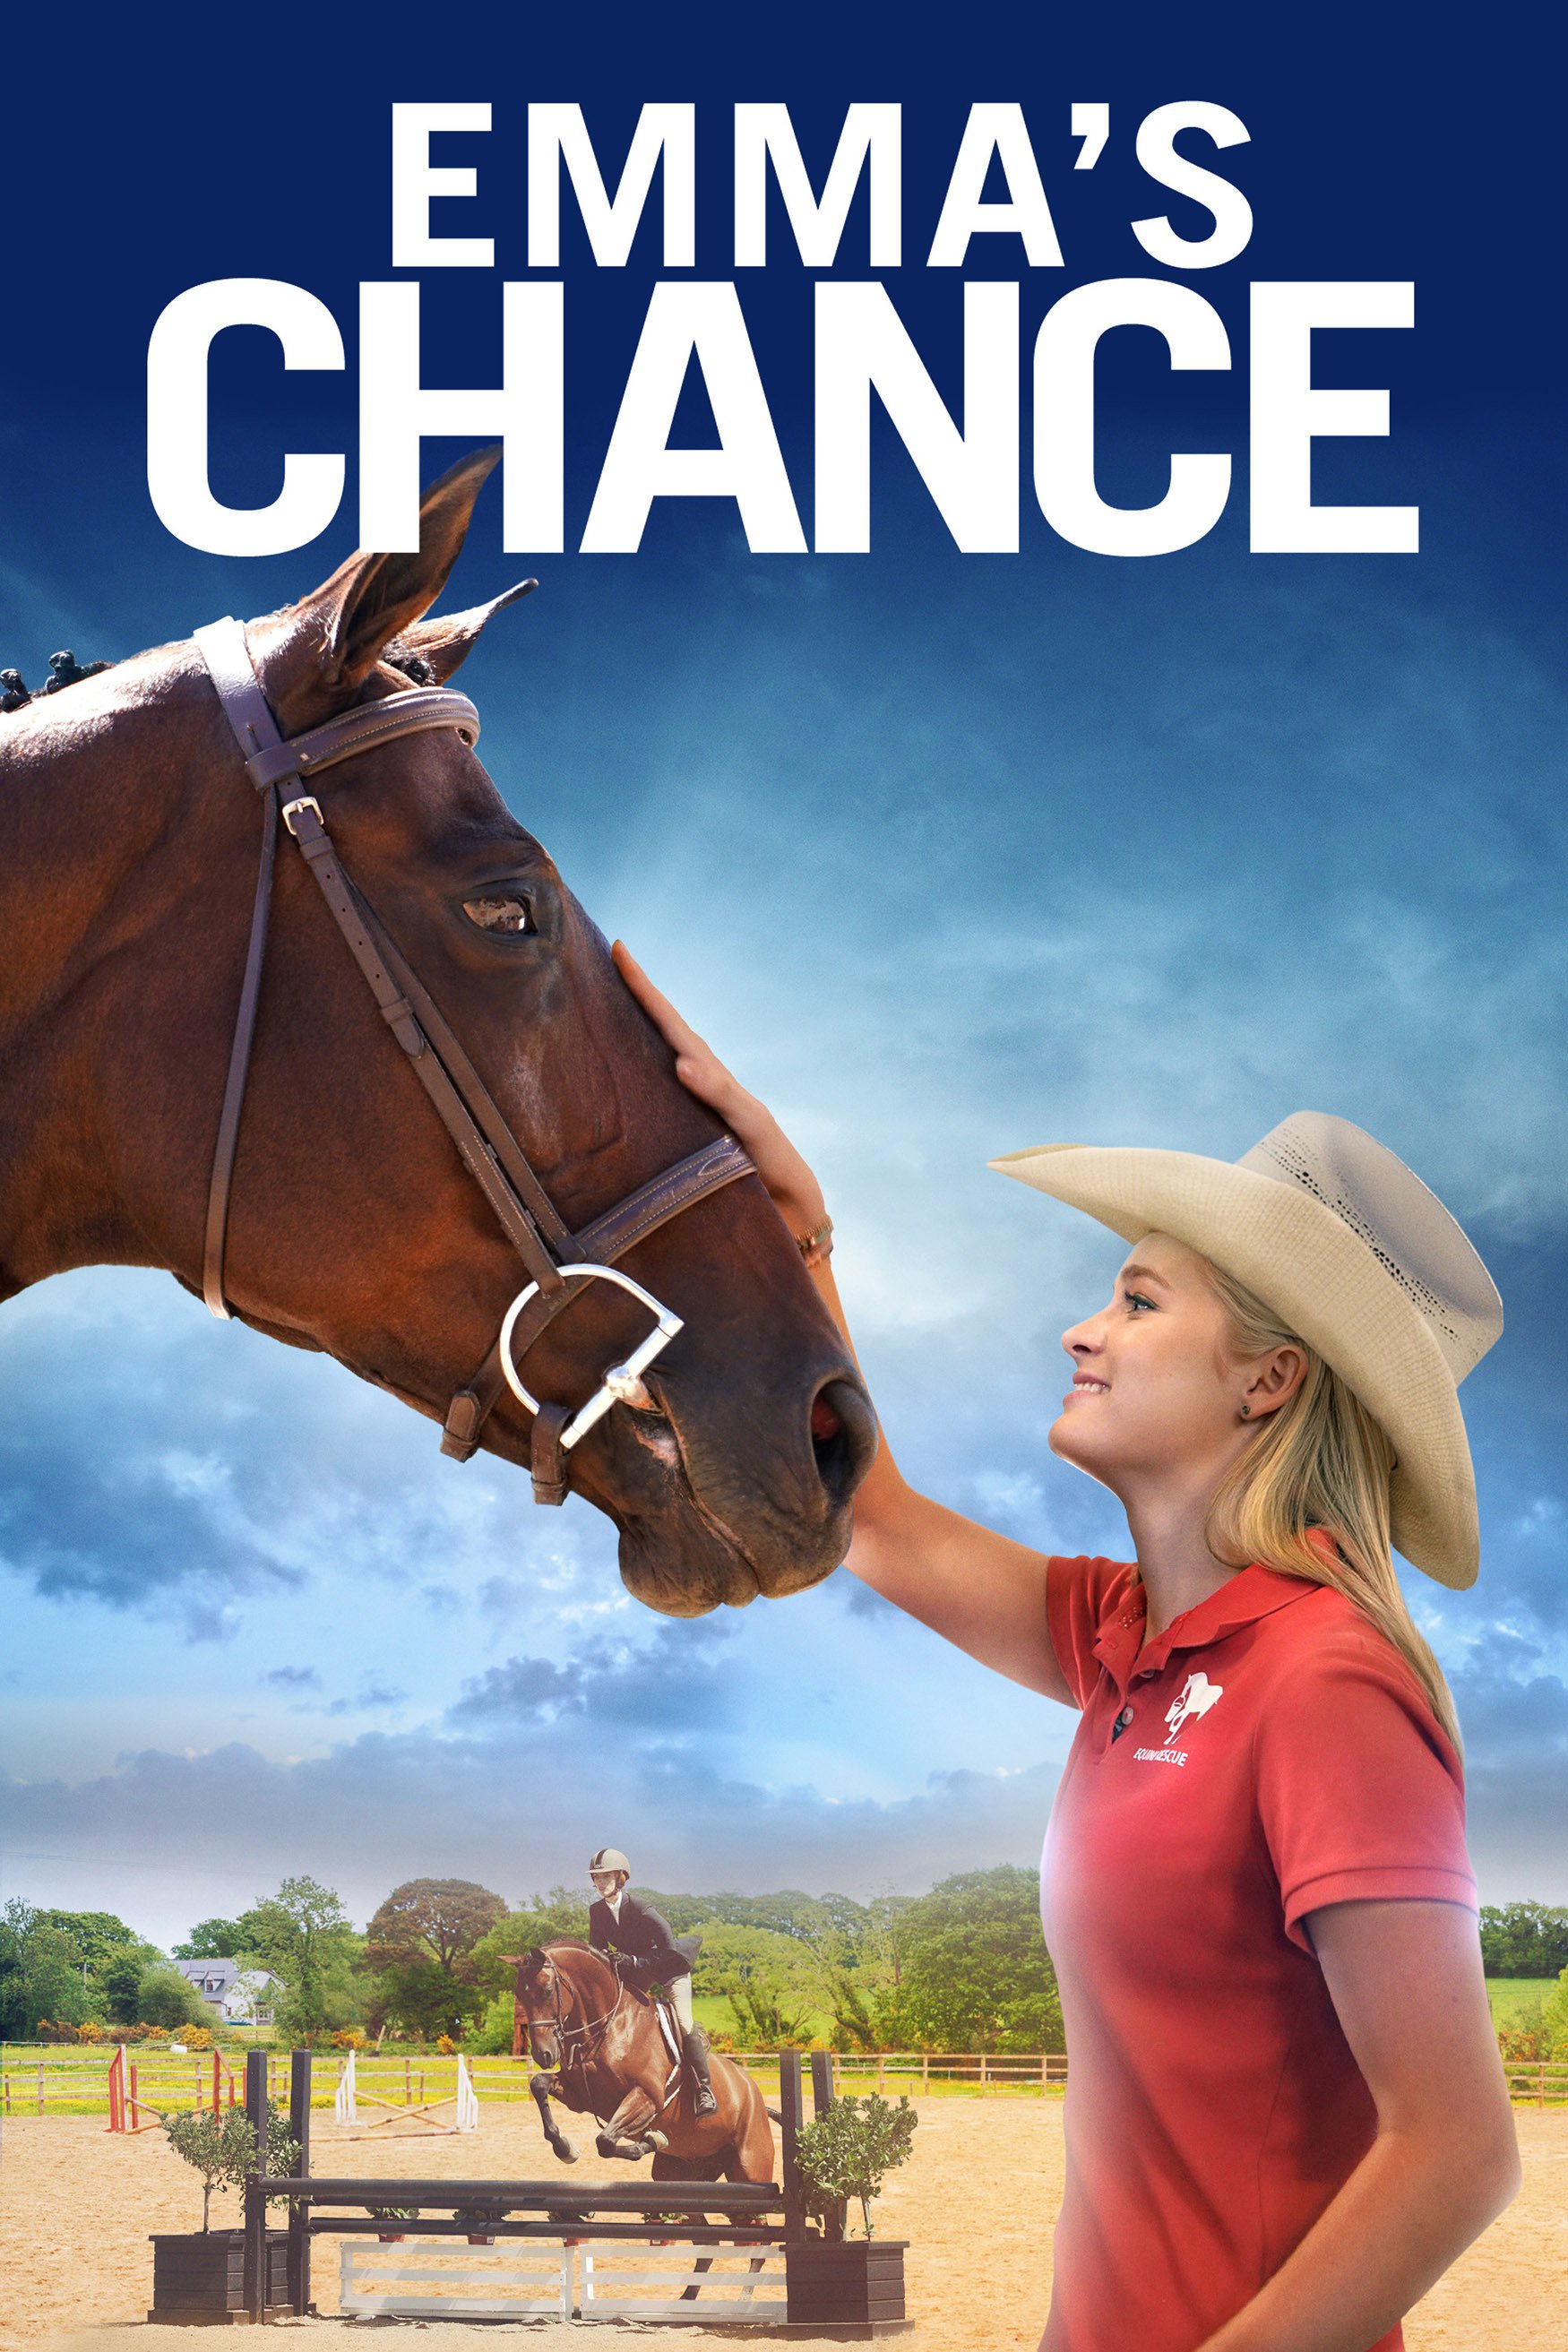 Poster for the movie "Emma's Chance"